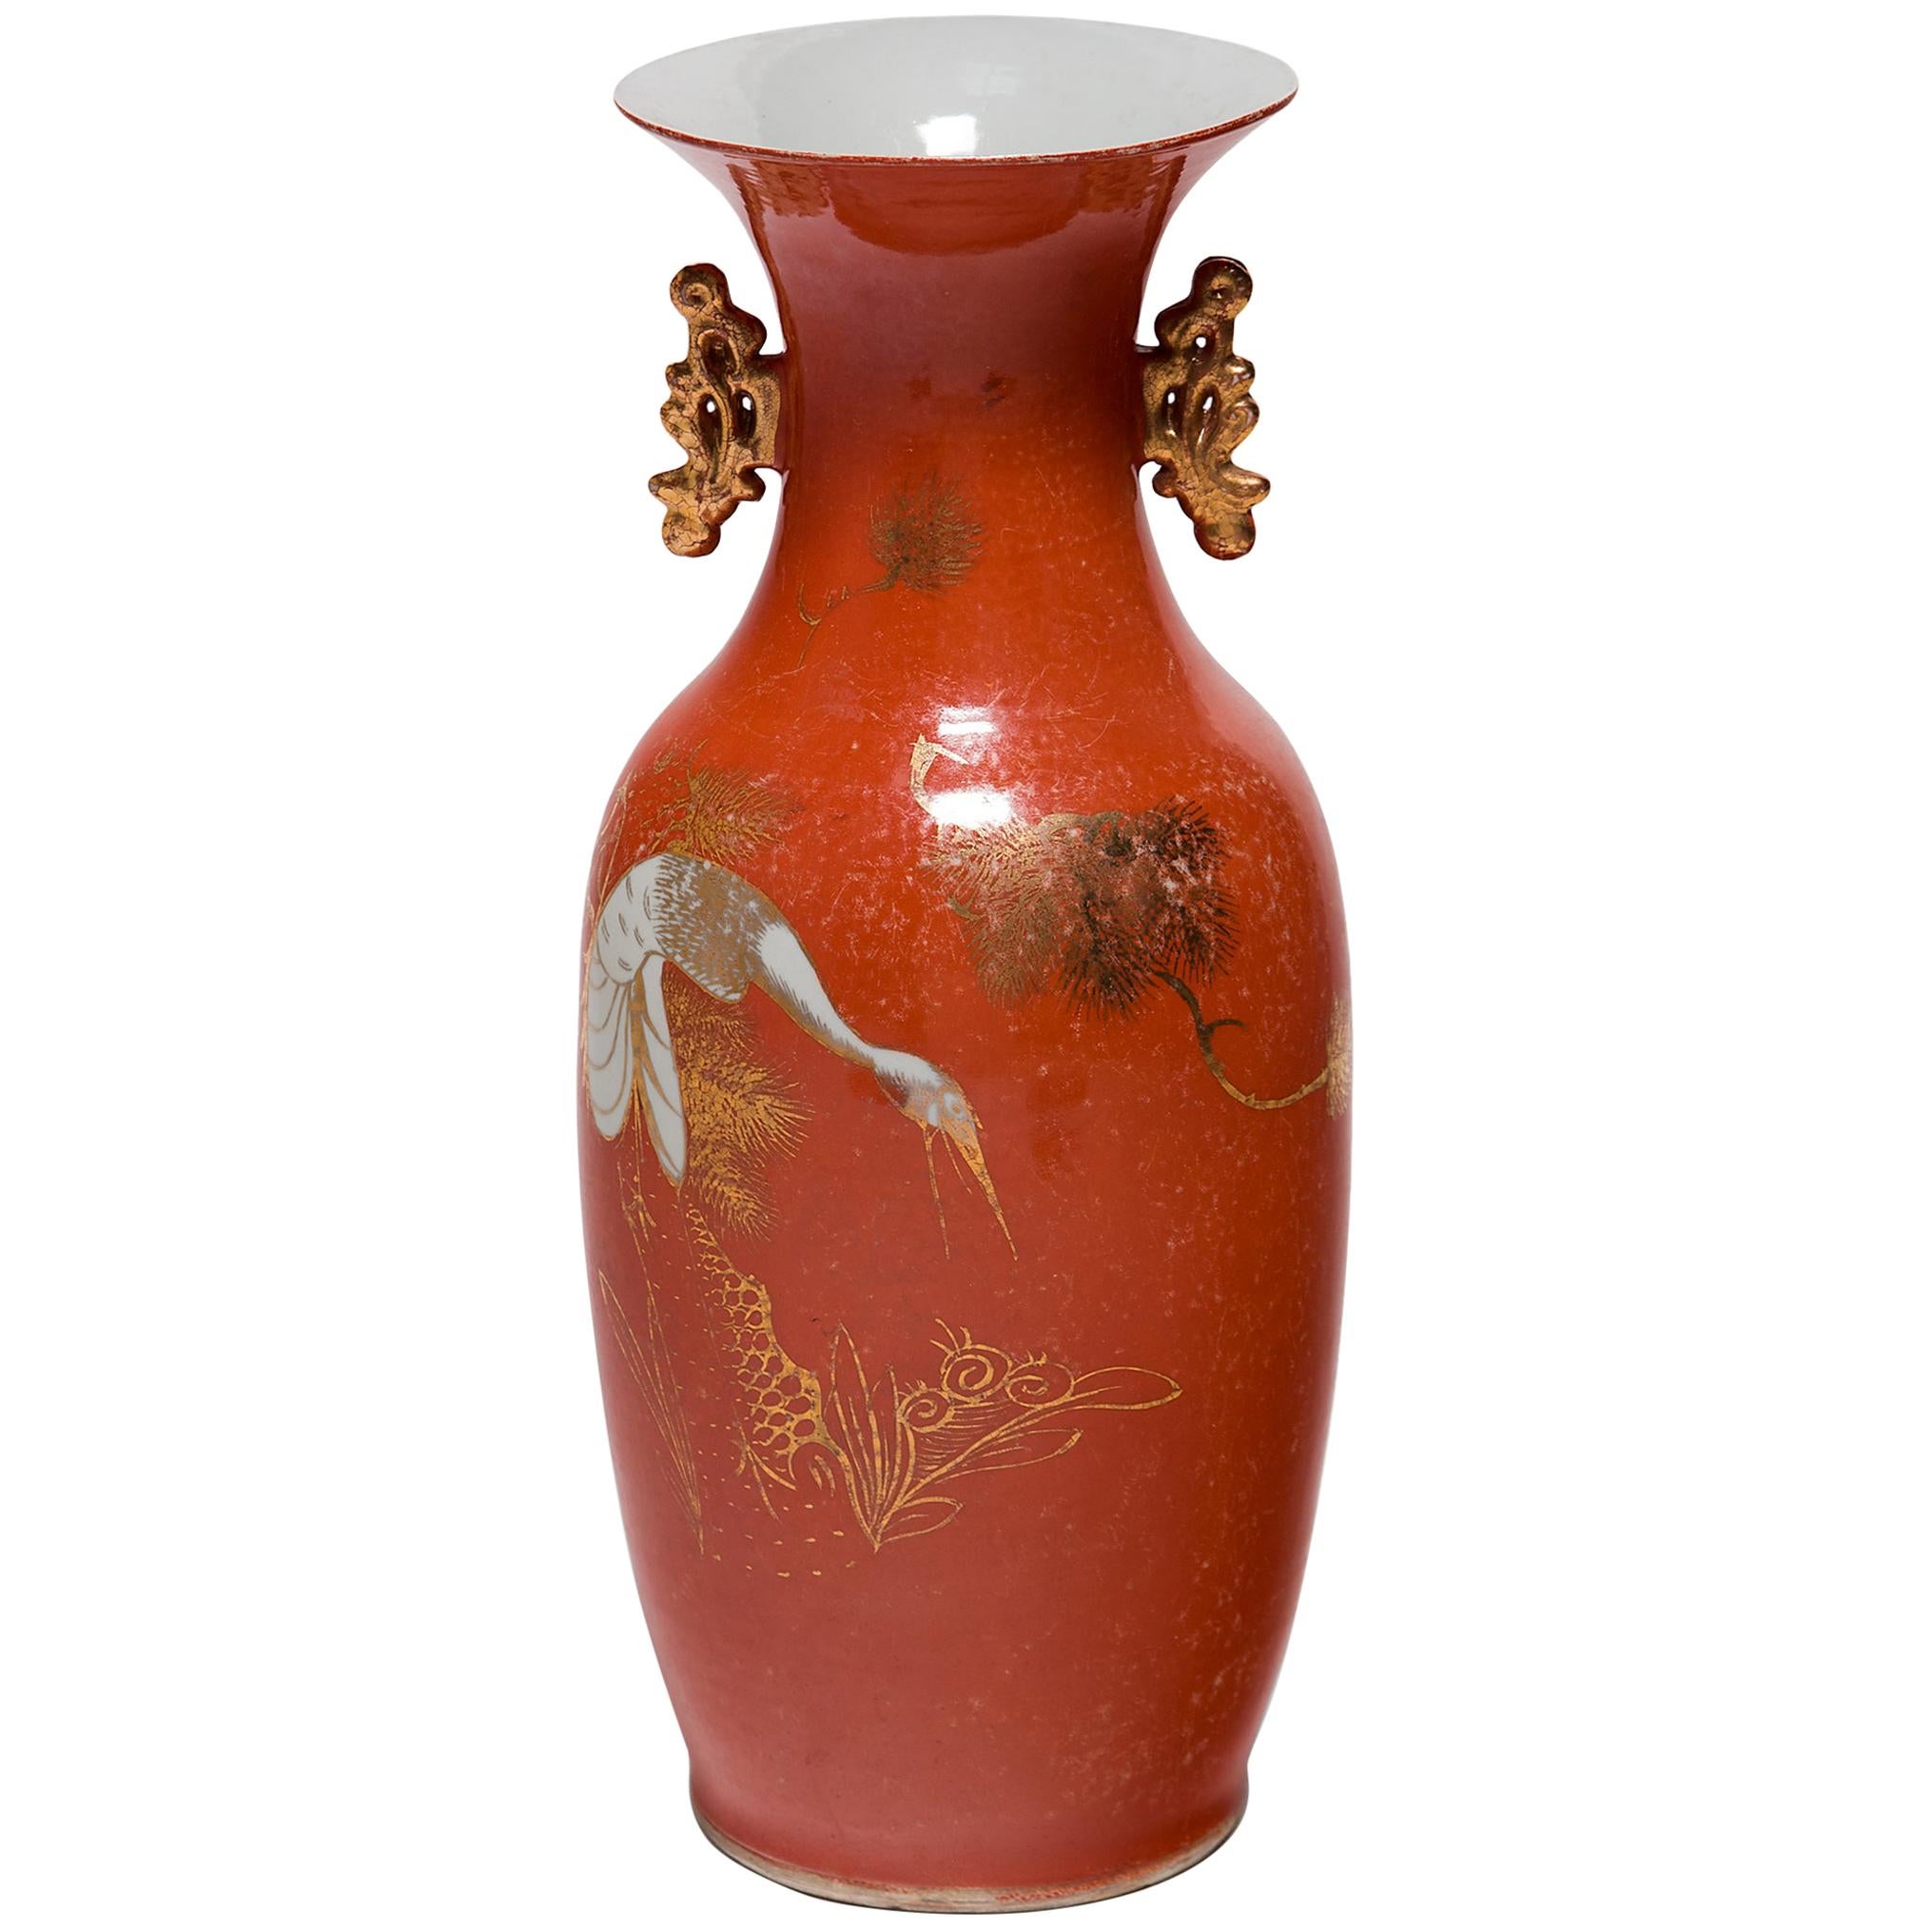 Vase persan Art Déco chinois avec grues blanches, vers 1920